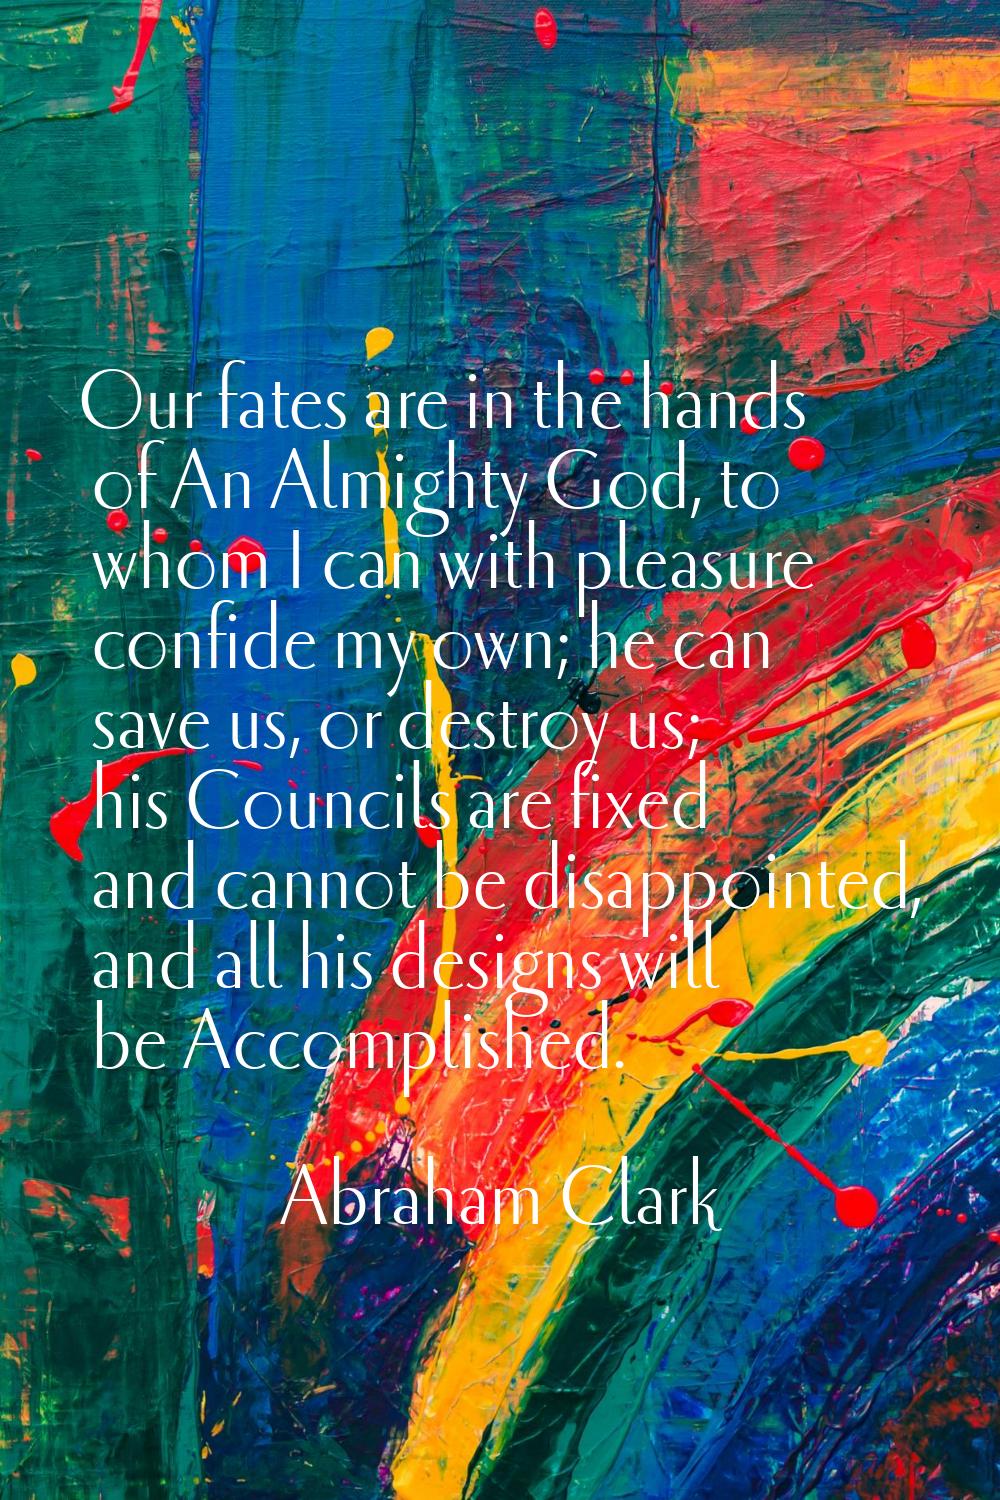 Our fates are in the hands of An Almighty God, to whom I can with pleasure confide my own; he can s